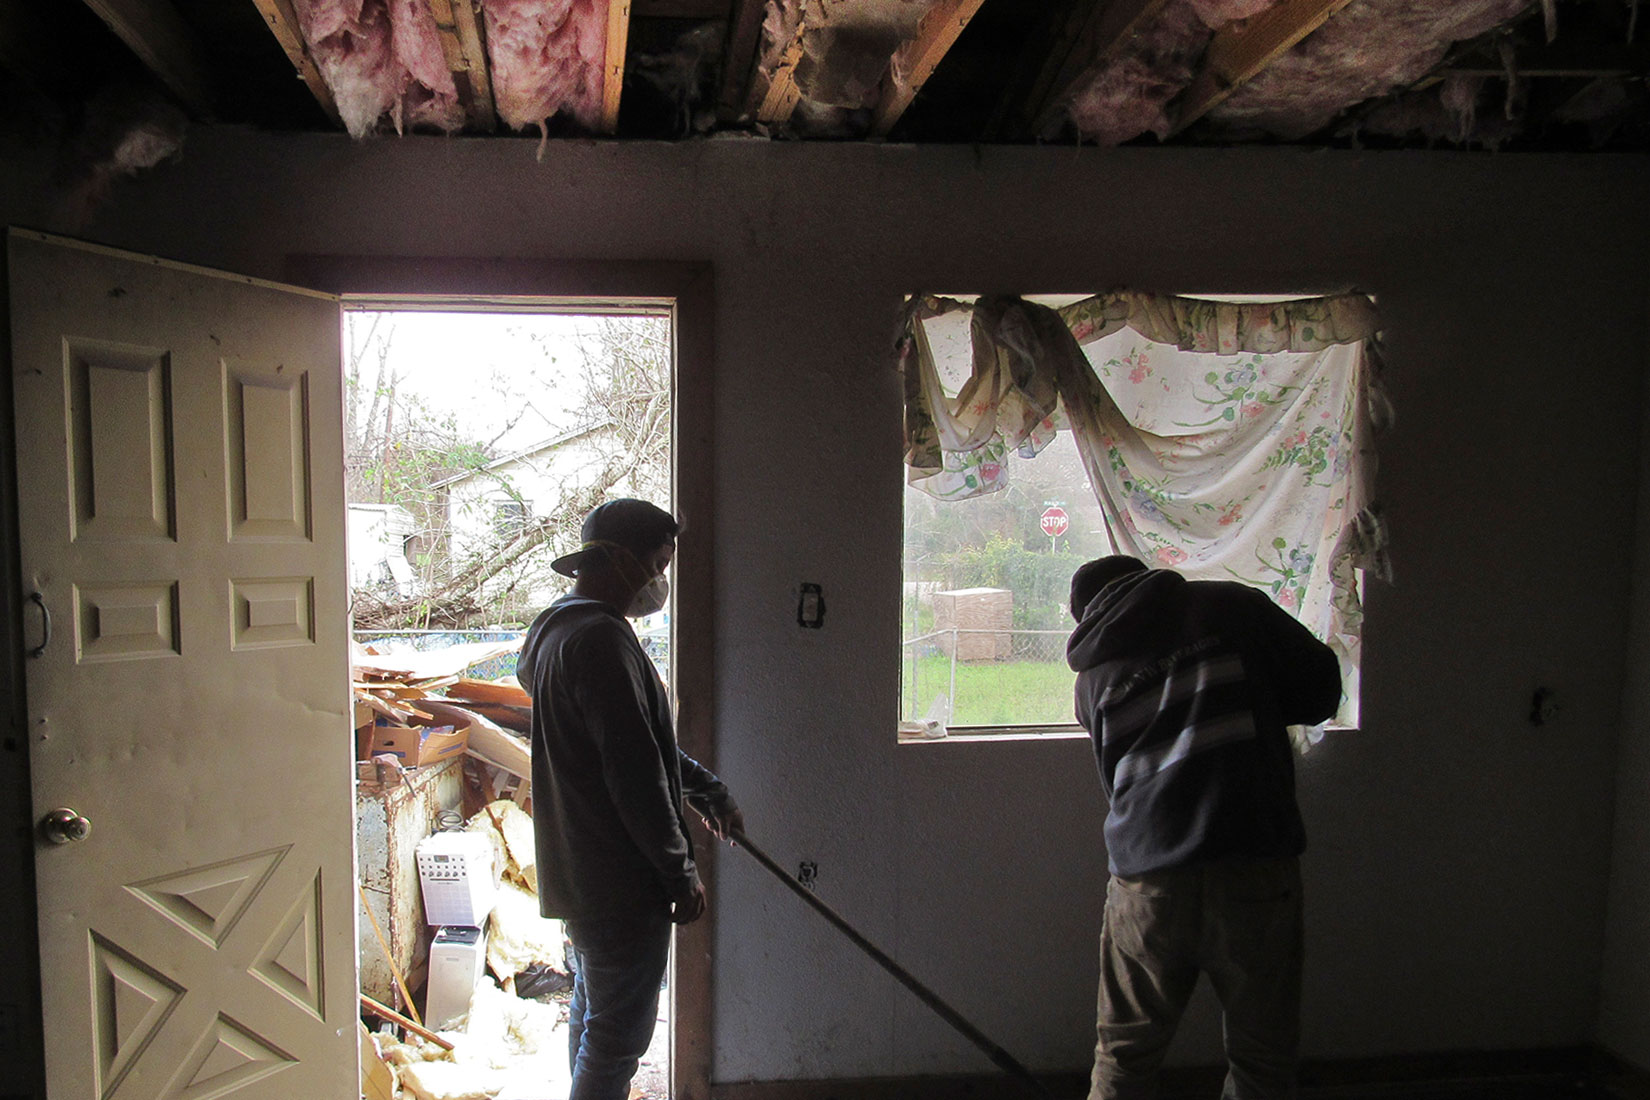 Two people repairing the interior of a home damaged by Hurricane Harvey; a pile of ruined belongings sits outside the doorway and the ceiling is exposed showing insulation